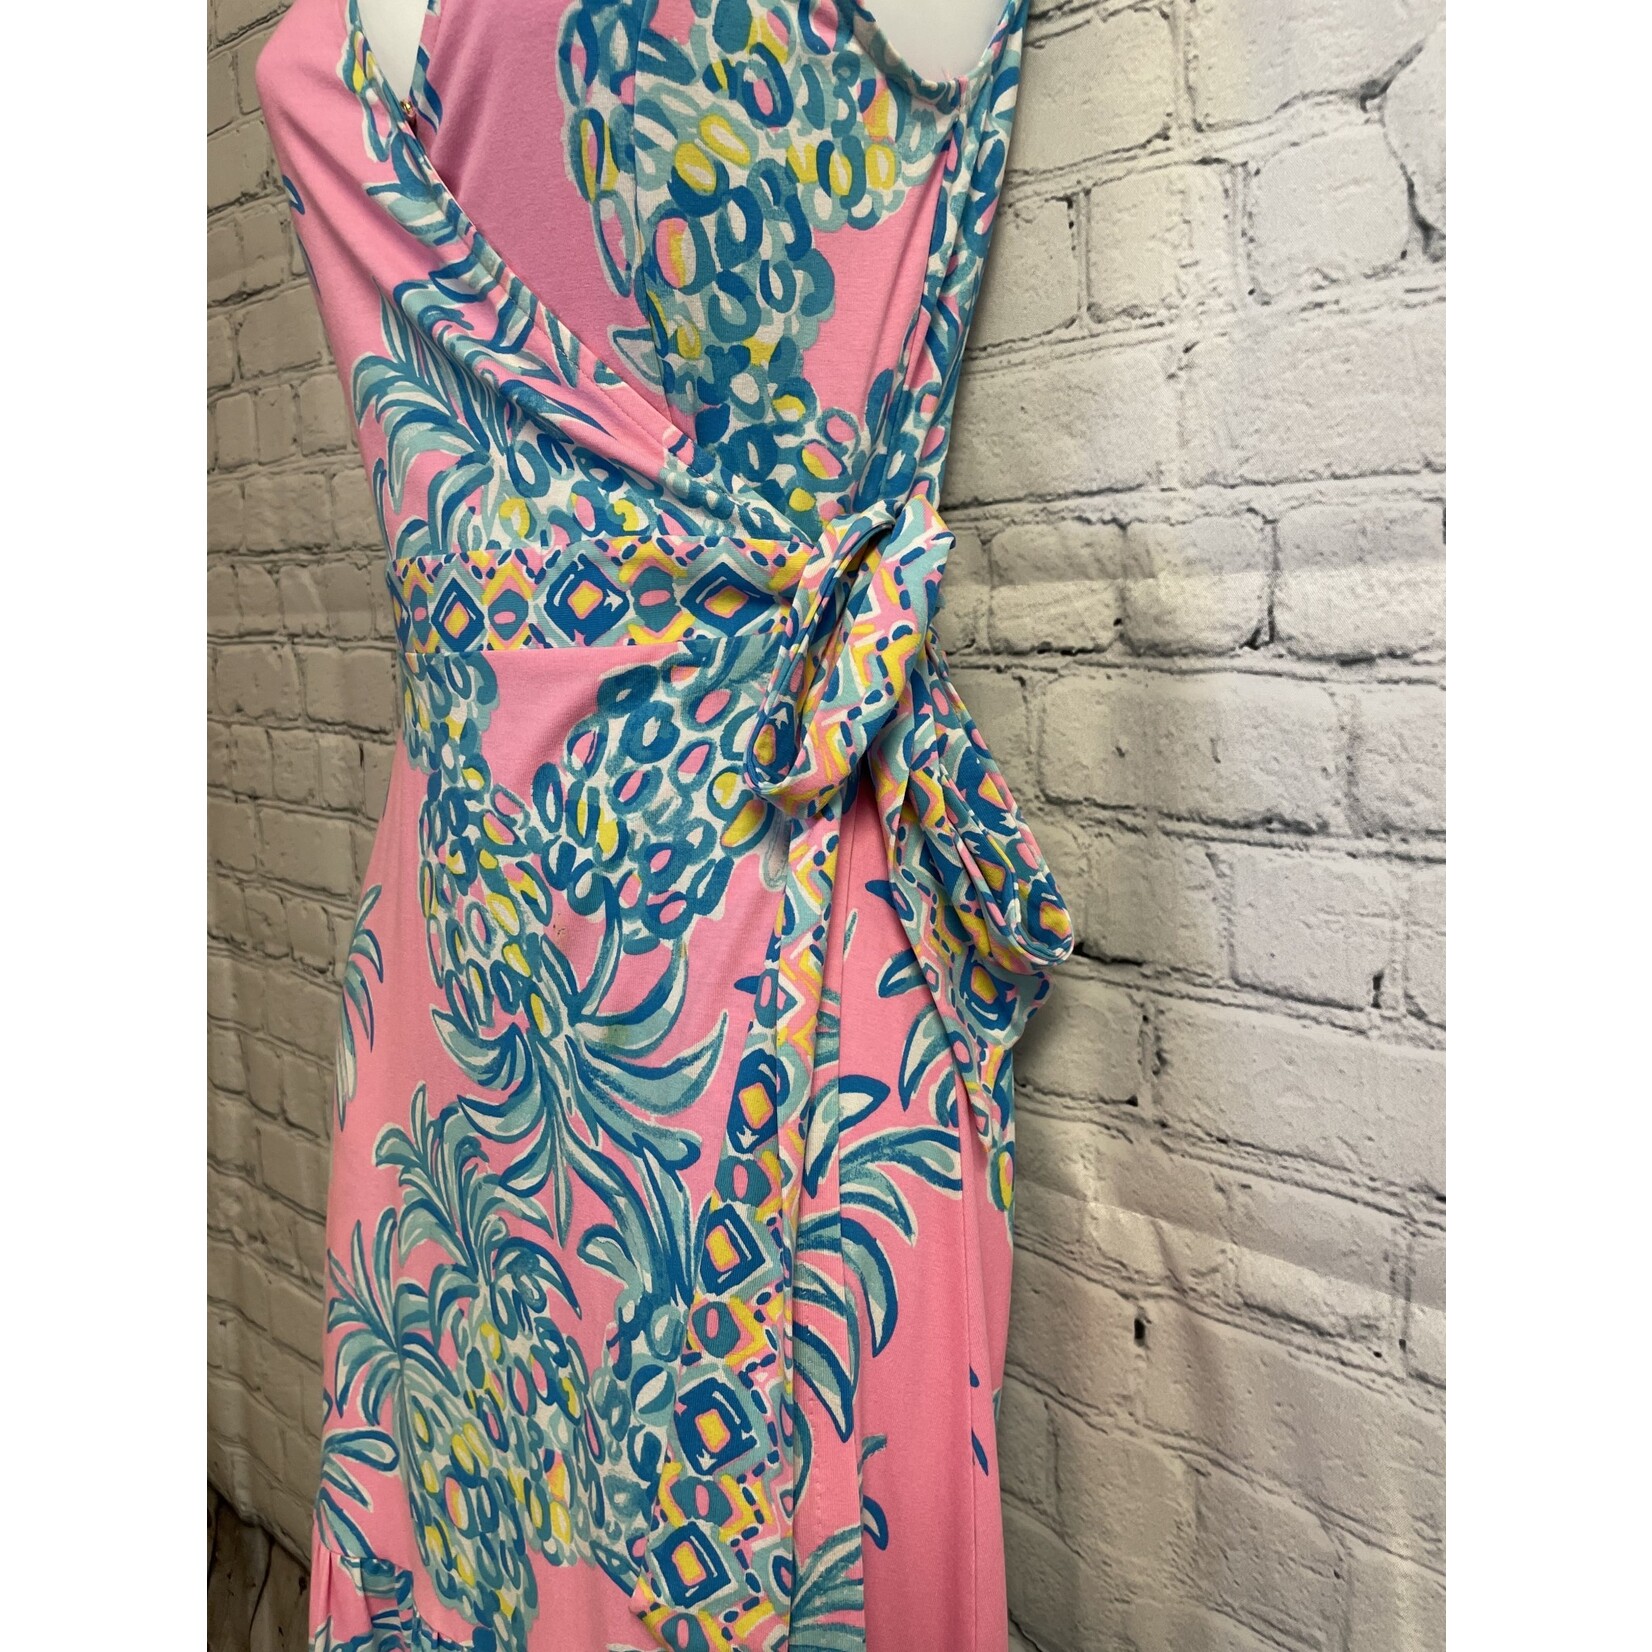 Lilly Pulitzer Lilly Pulitzer, Pelican Pink, Misha Wrap Dress, XS, MSRP $